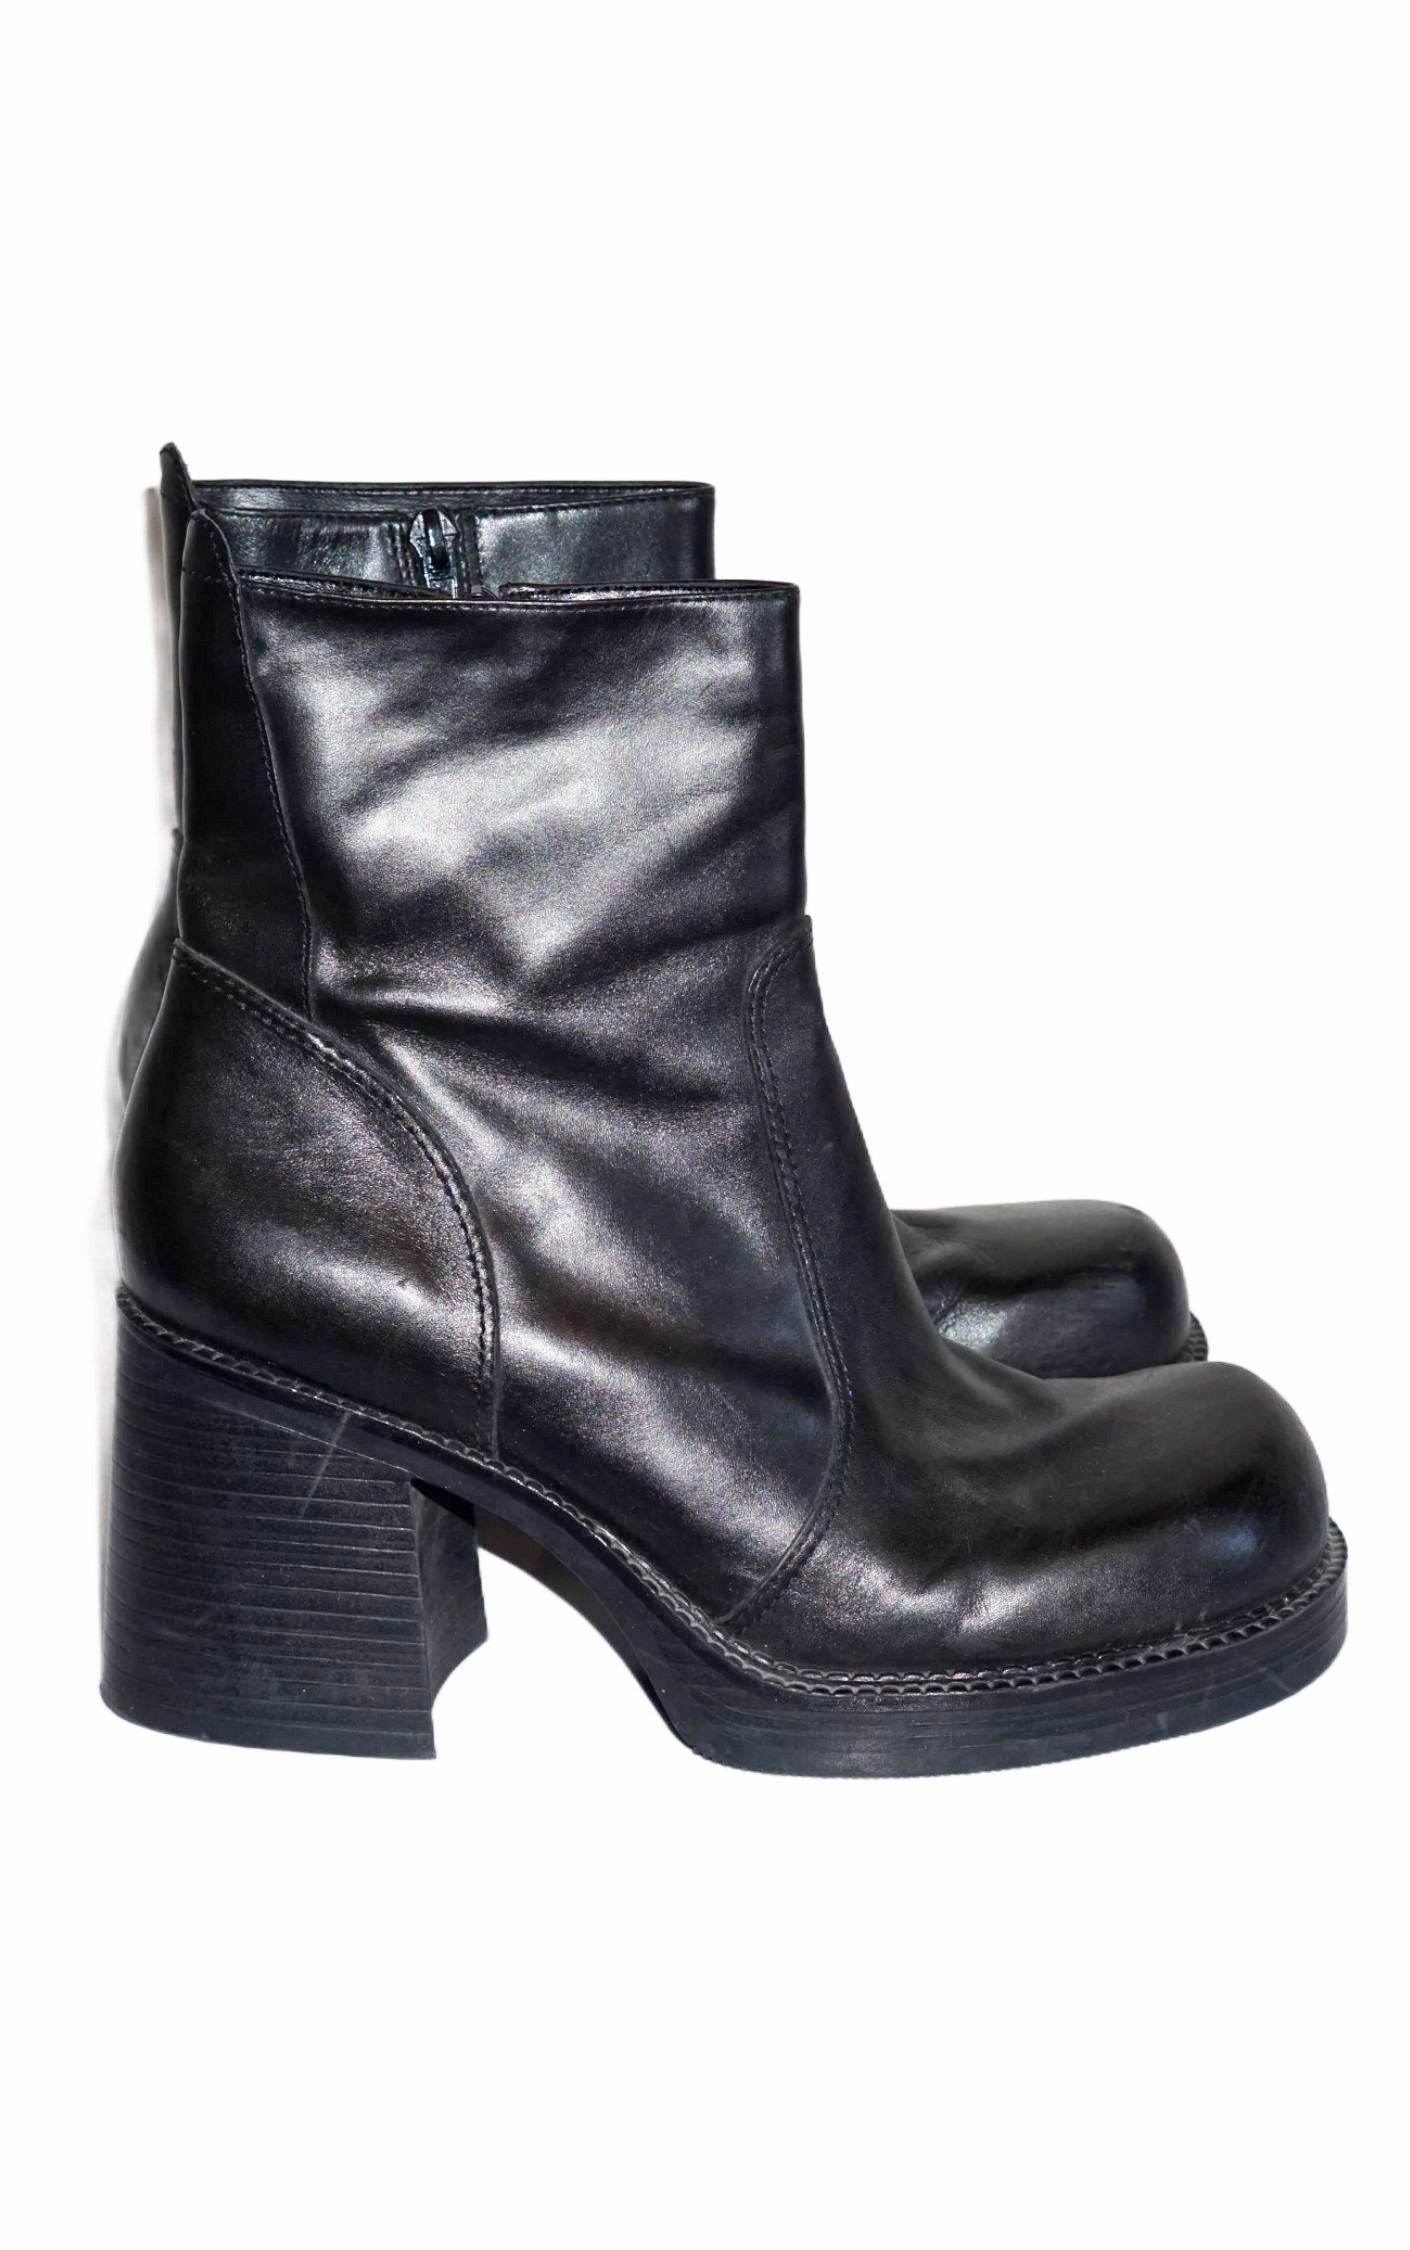 VINTAGE 90s Chunky Heels Square Toe Black Leather Ankle Boots resellum